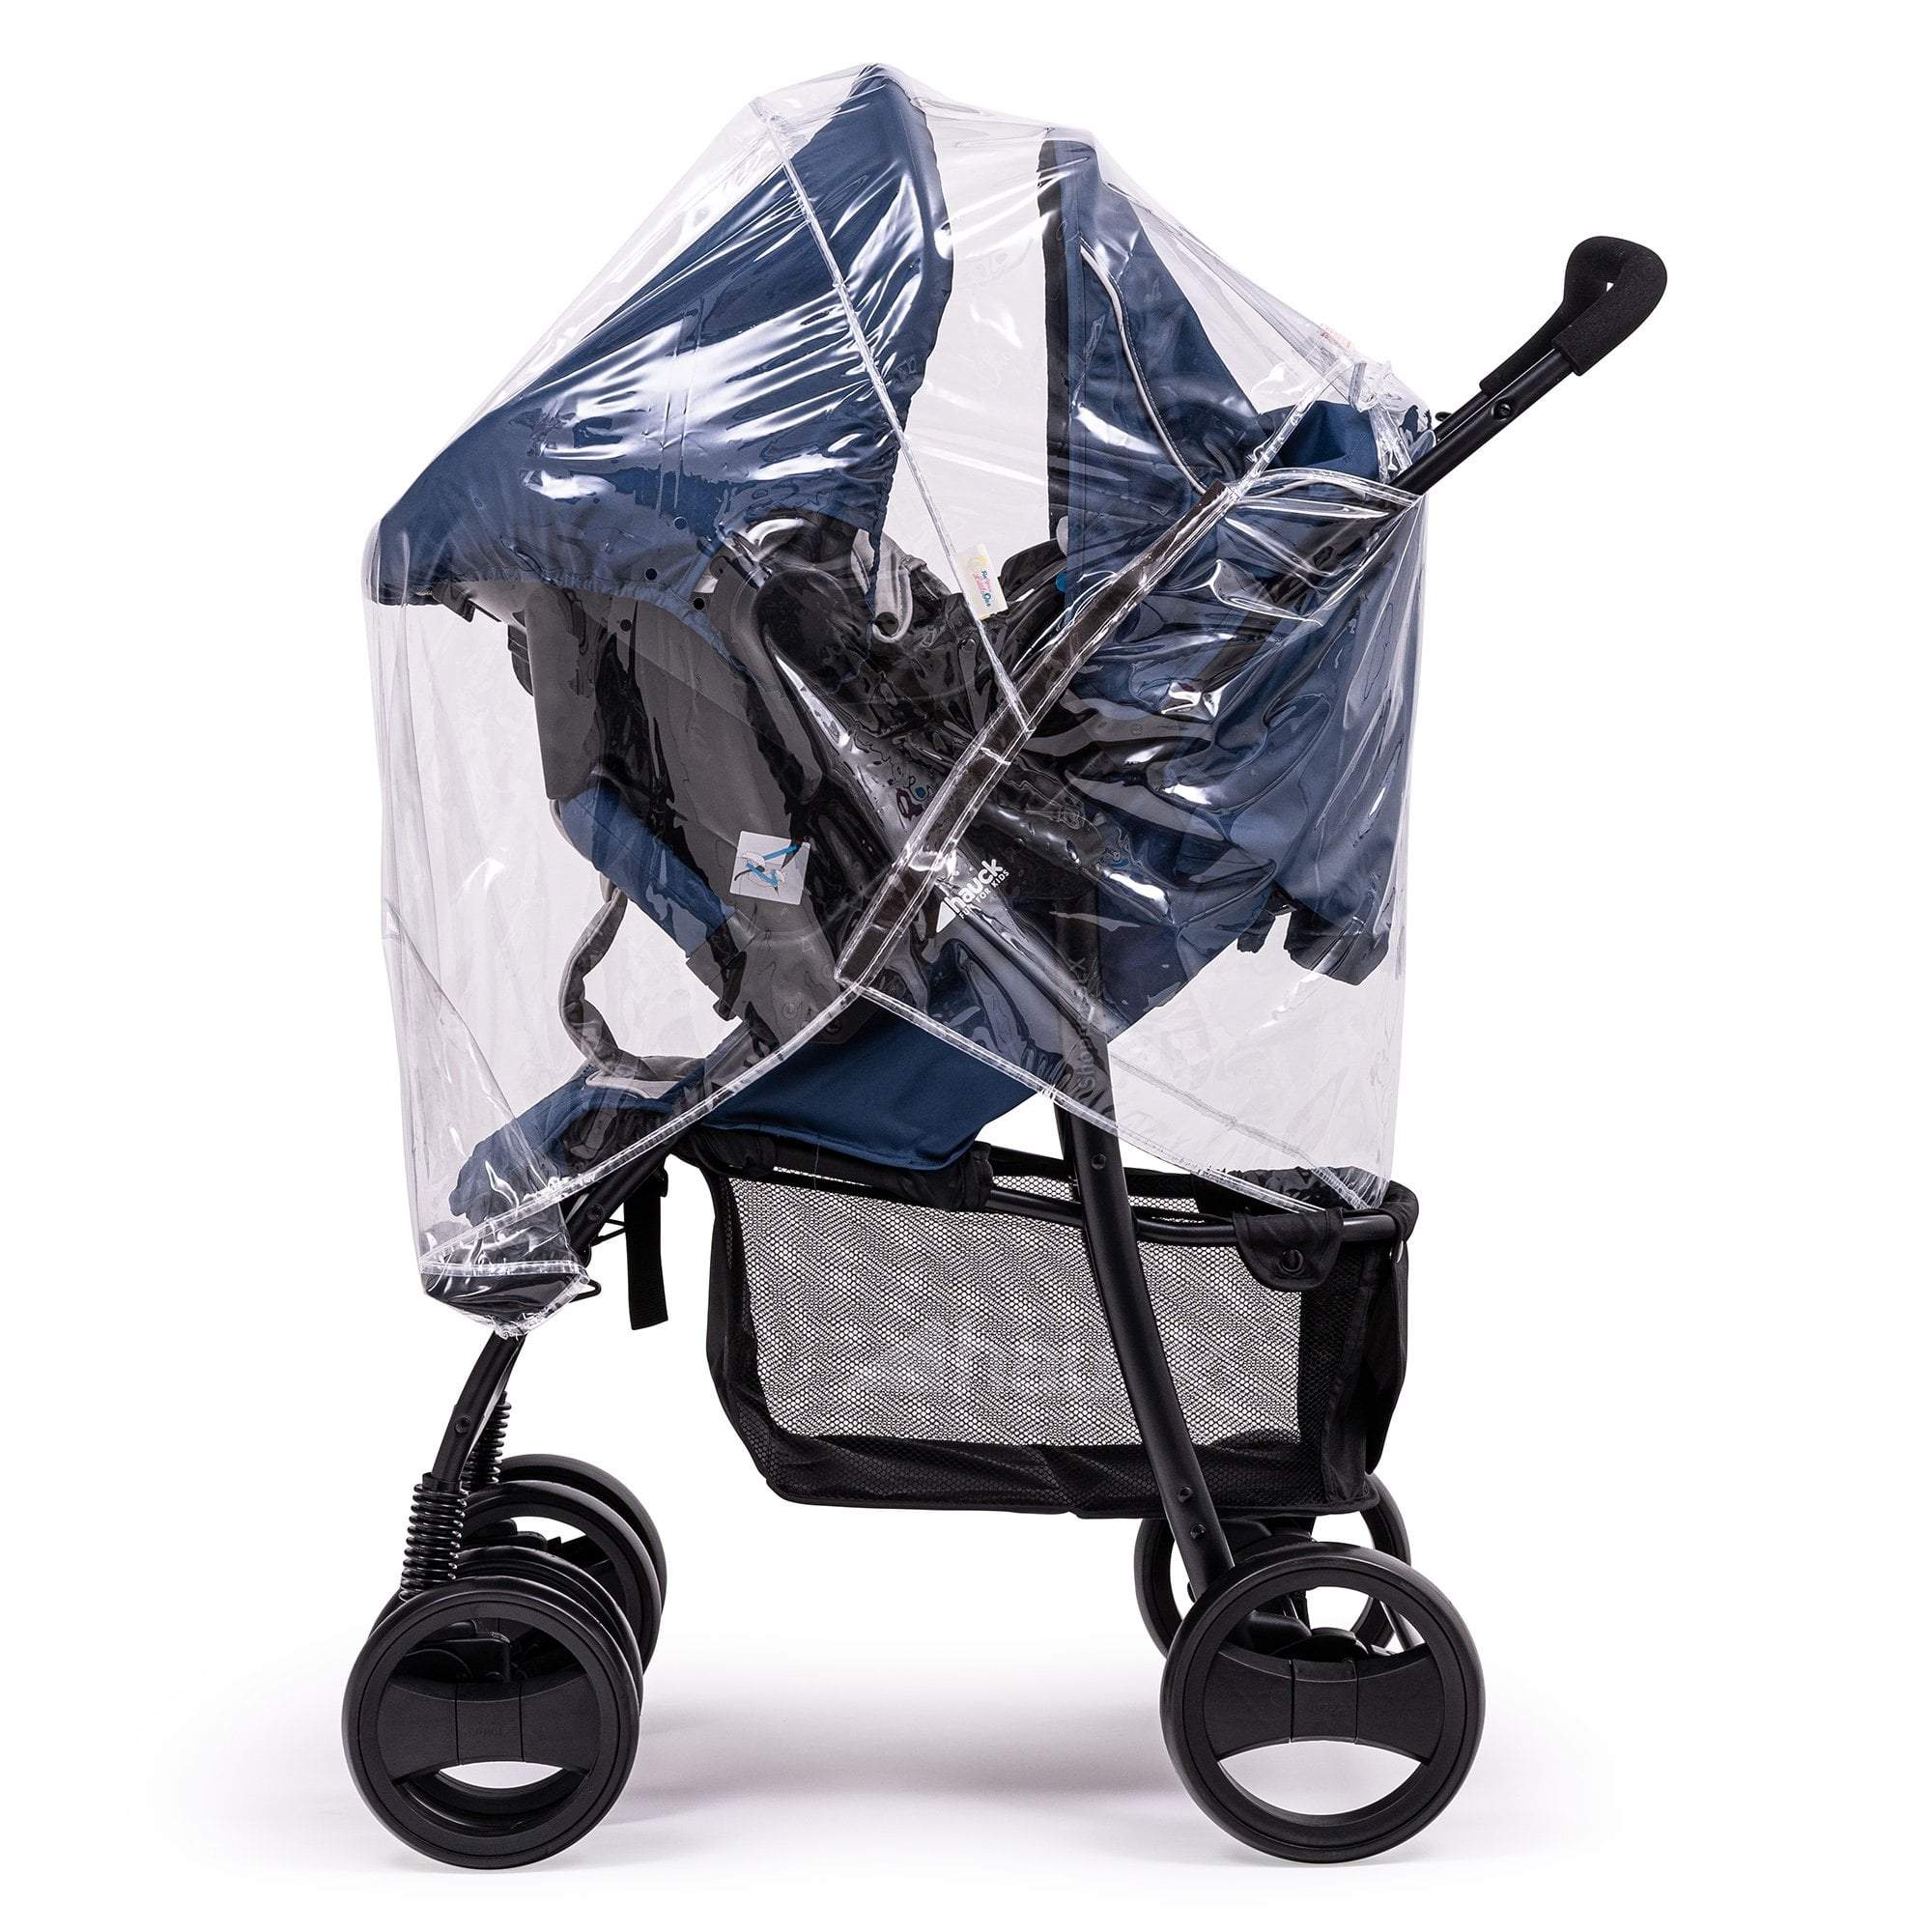 Travel System Raincover Compatible with Baby Elegance - Fits All Models - For Your Little One